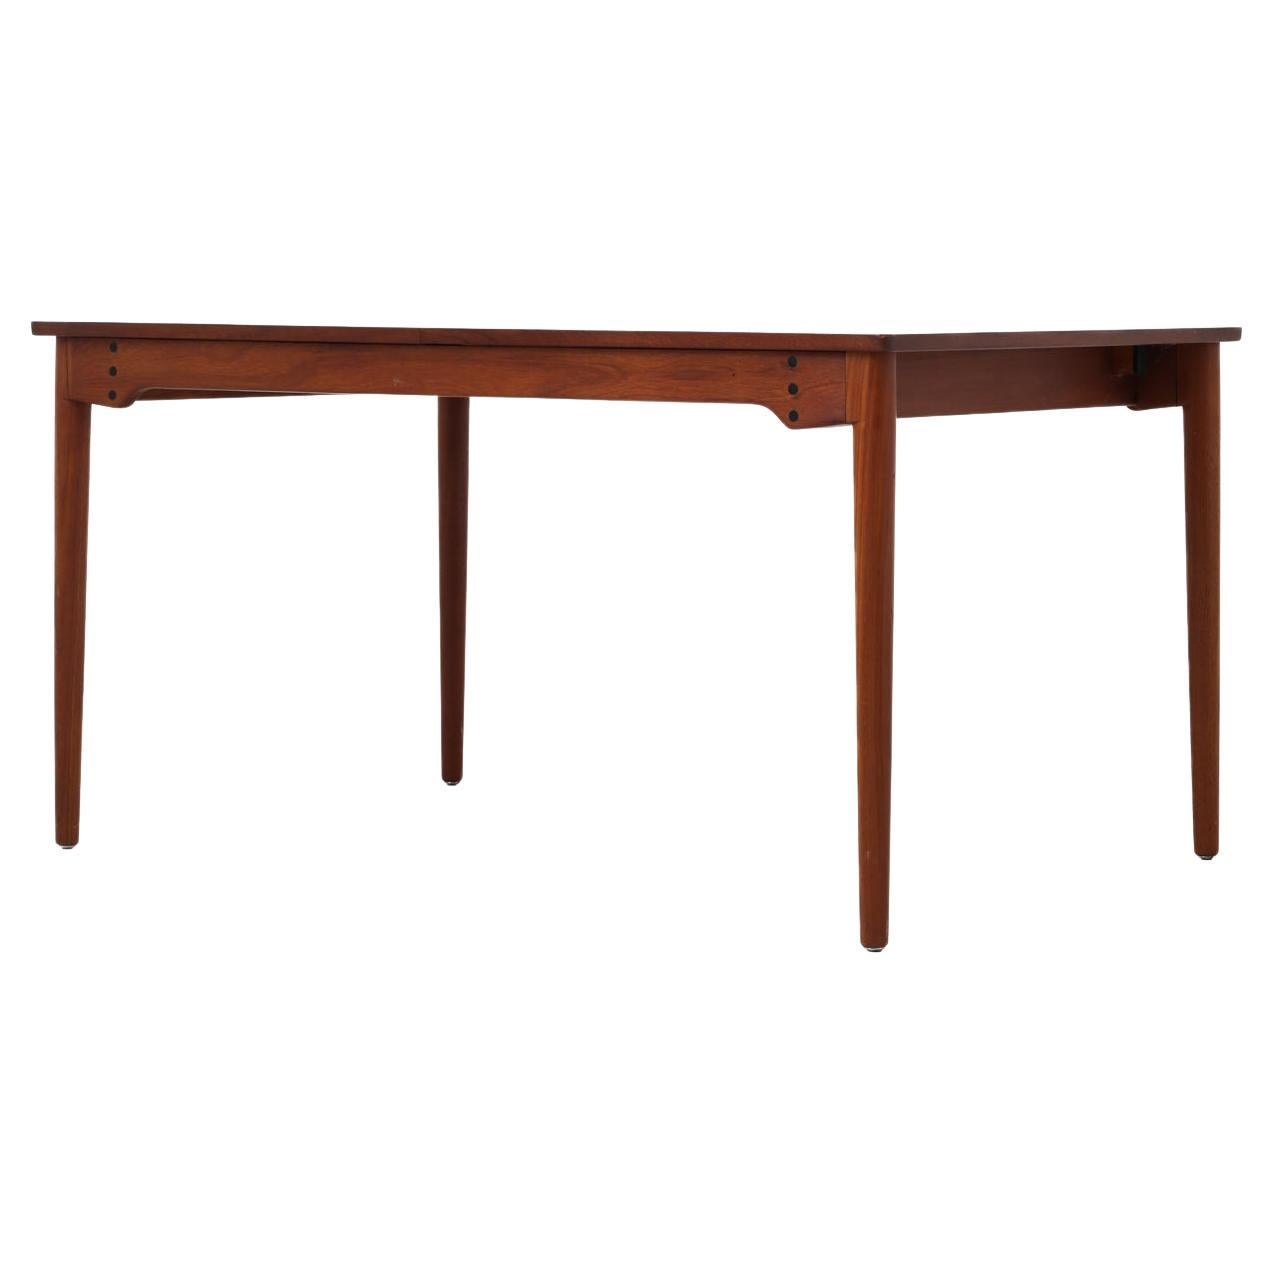 Dining Table by Finn Juhl BO 65 with Two Extensions Leaves